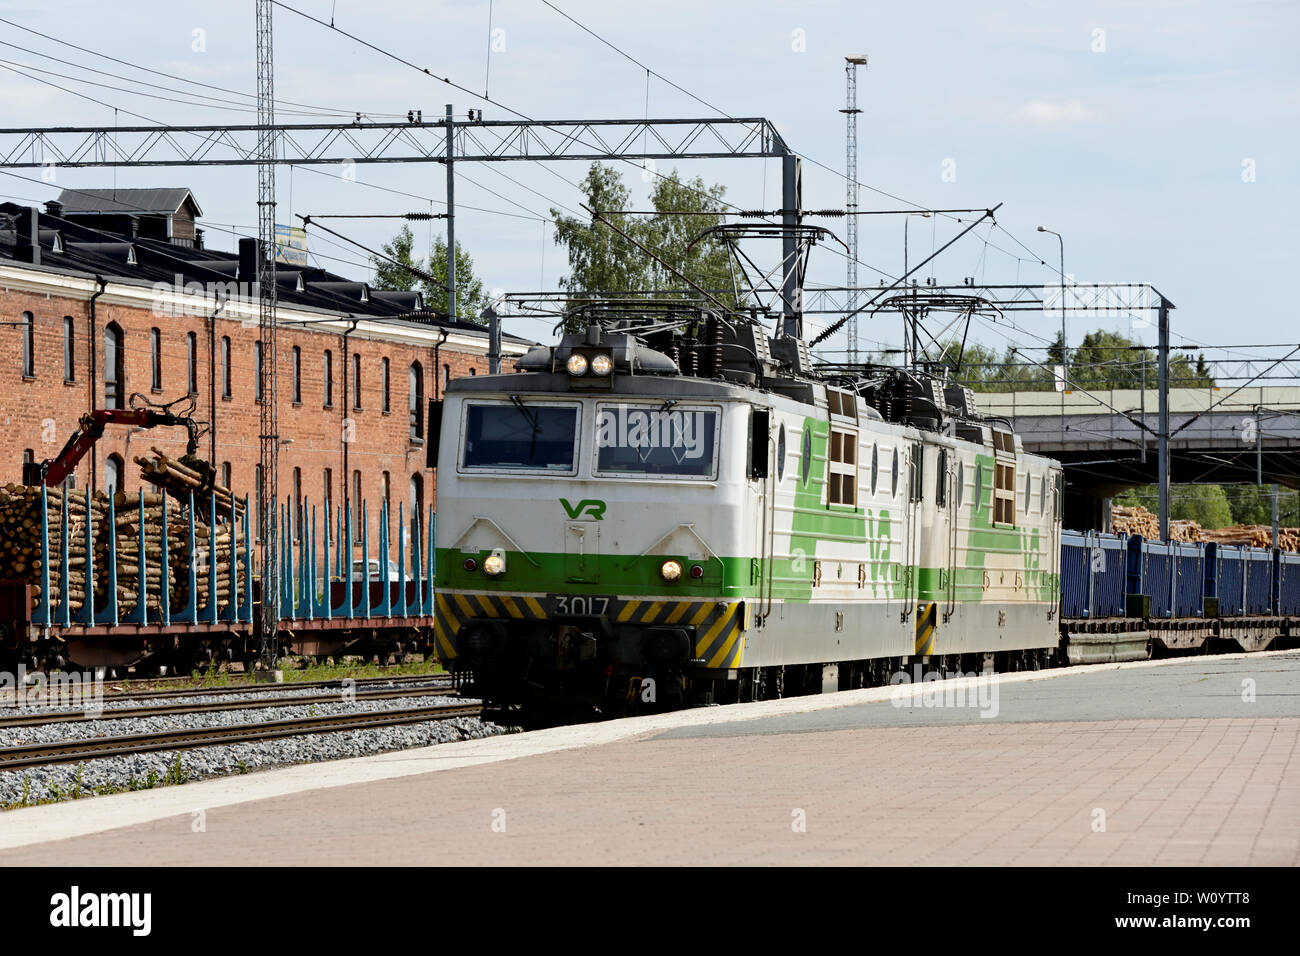 Hameenlinna, Finland 06/12/2019 At Hameenlinna railway station green white VR-train passing by with a lot of railway carriage Stock Photo